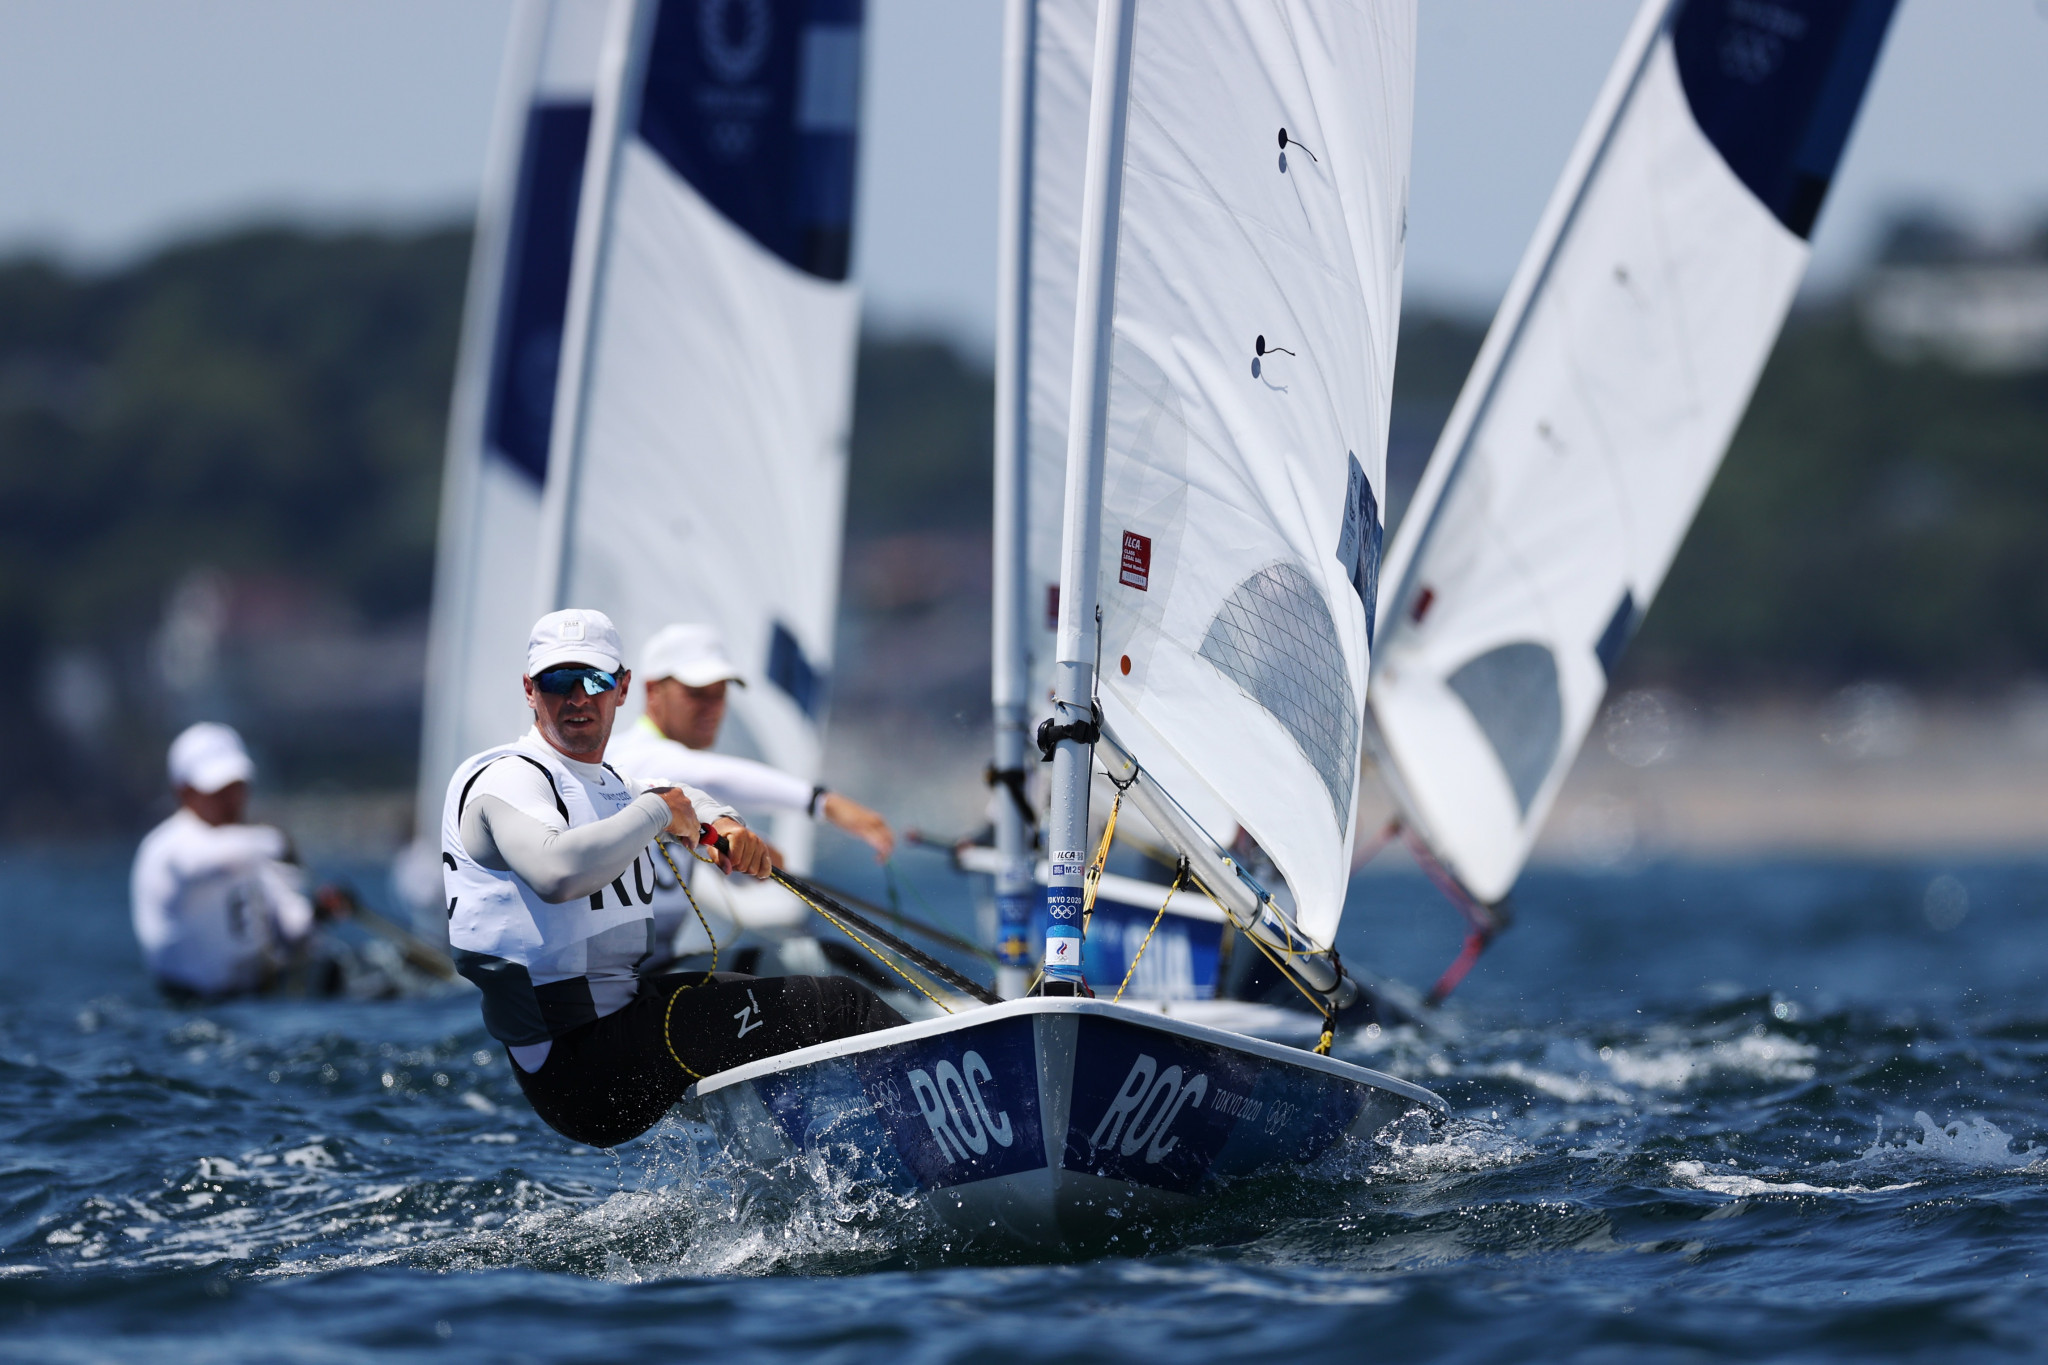 World Sailing to make decision on readmission of Russia and Belarus next month